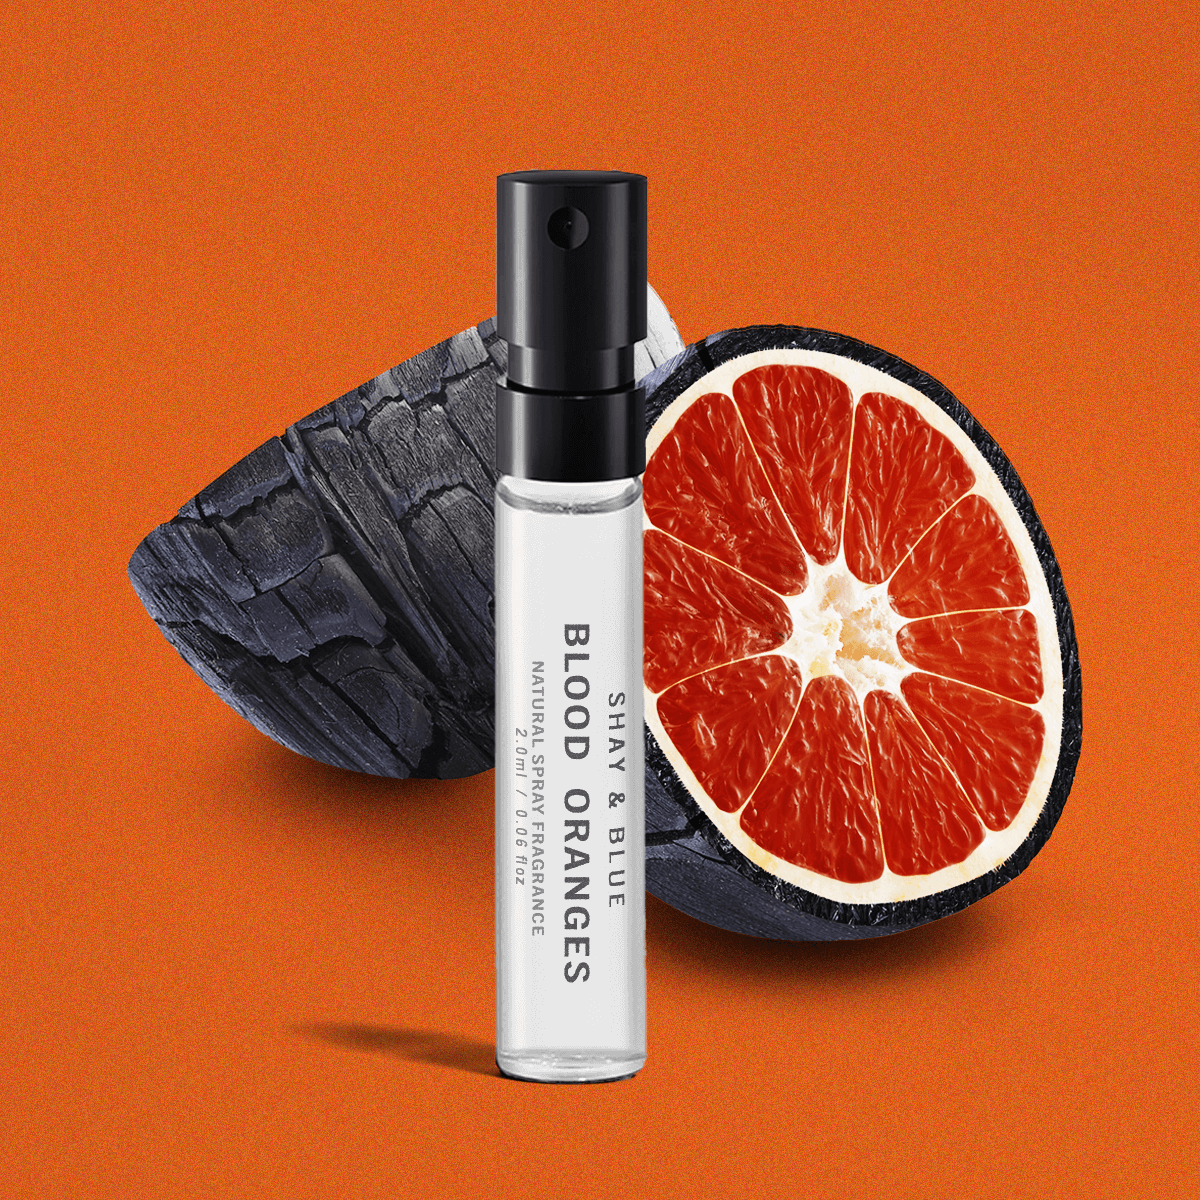 Blood Oranges Fragrance 2ml | Zesty blood oranges with rich and sensual blend of woods and smoky leather. | Clean All Gender Fragrance | Shay & Blue